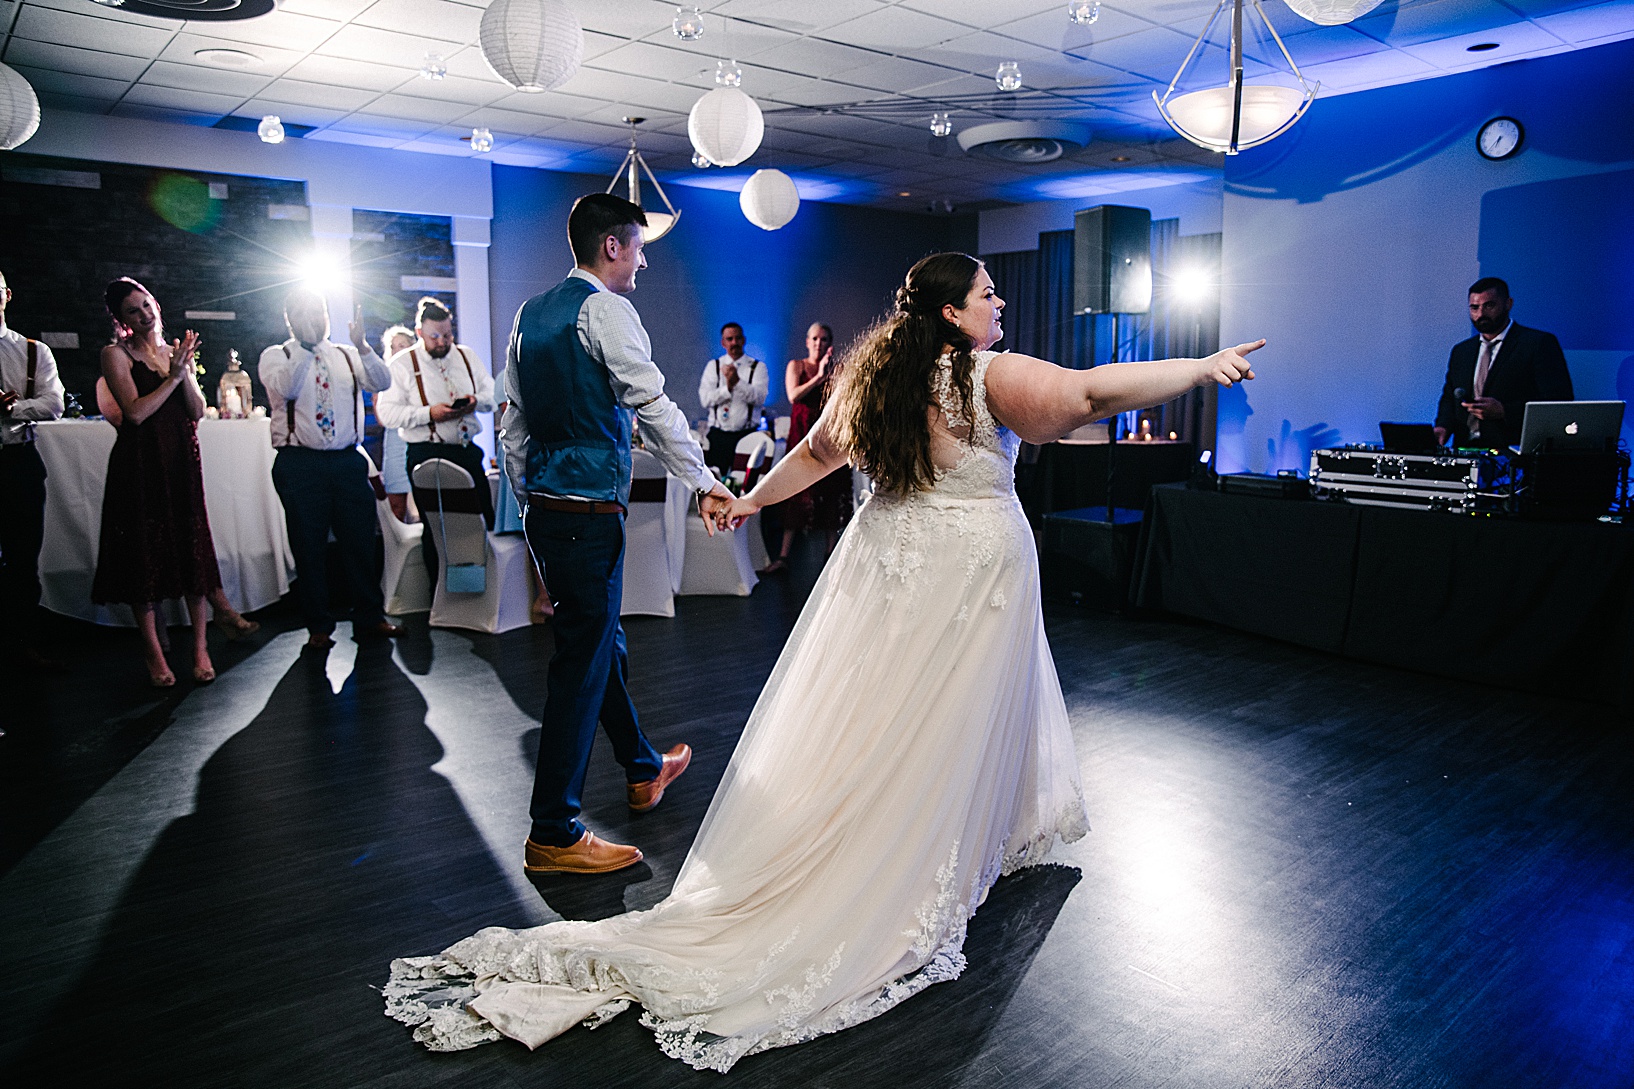 Groom and Bride exit the dance floor after their first dance